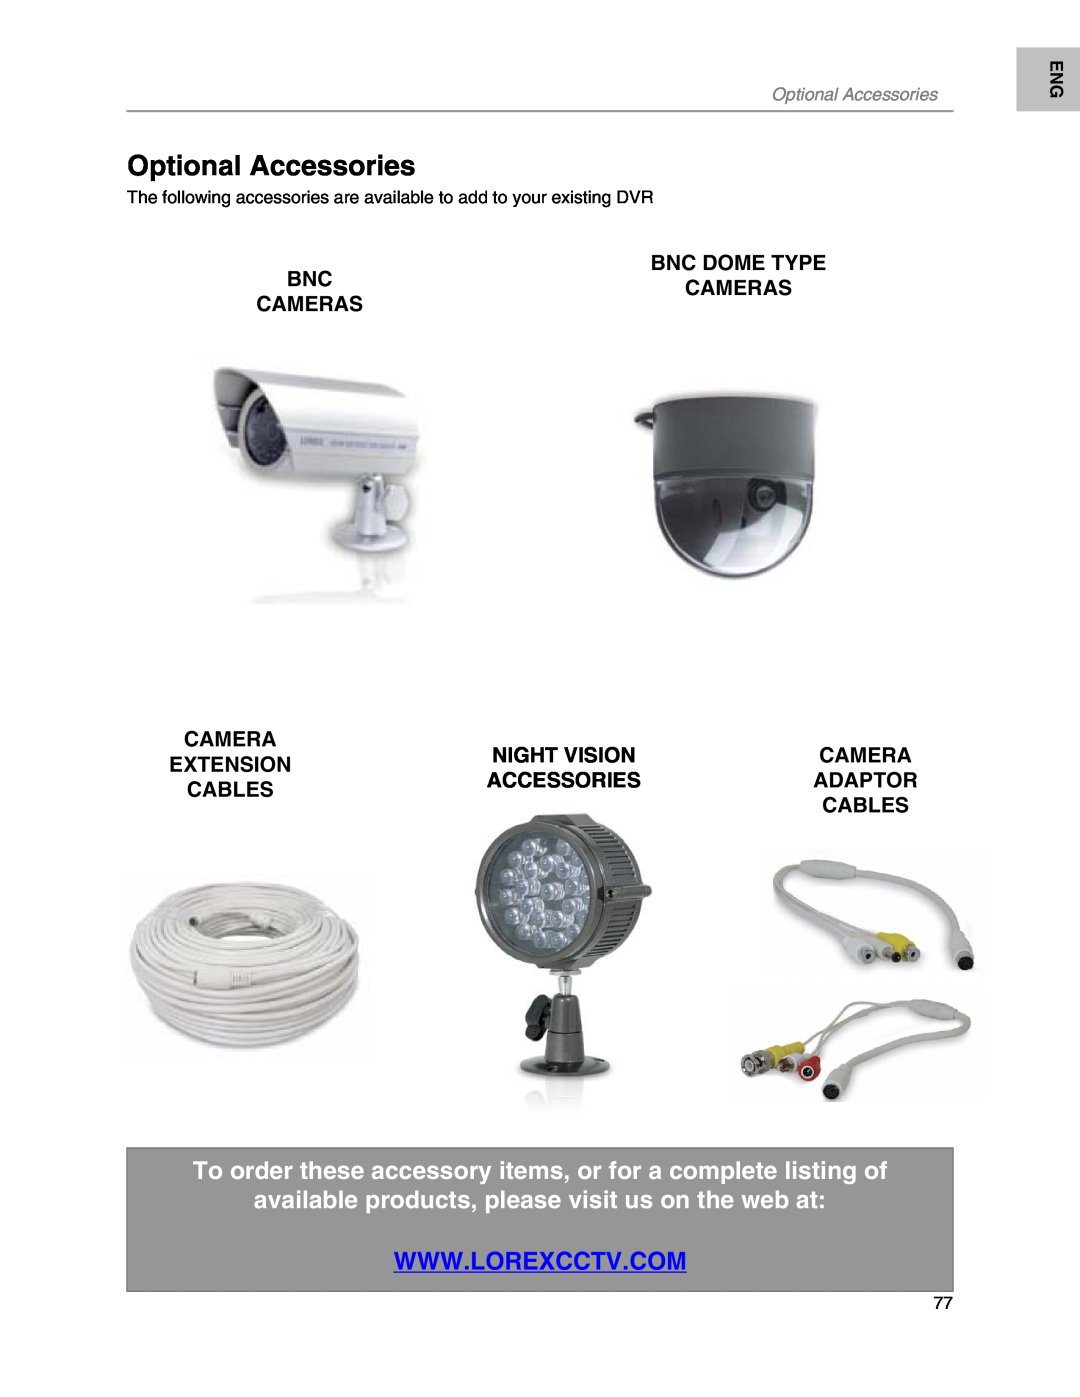 LOREX Technology L204 Optional Accessories, Bnc Dome Type Bnccameras Cameras, Night Vision, Adaptor, Extension, Cables 